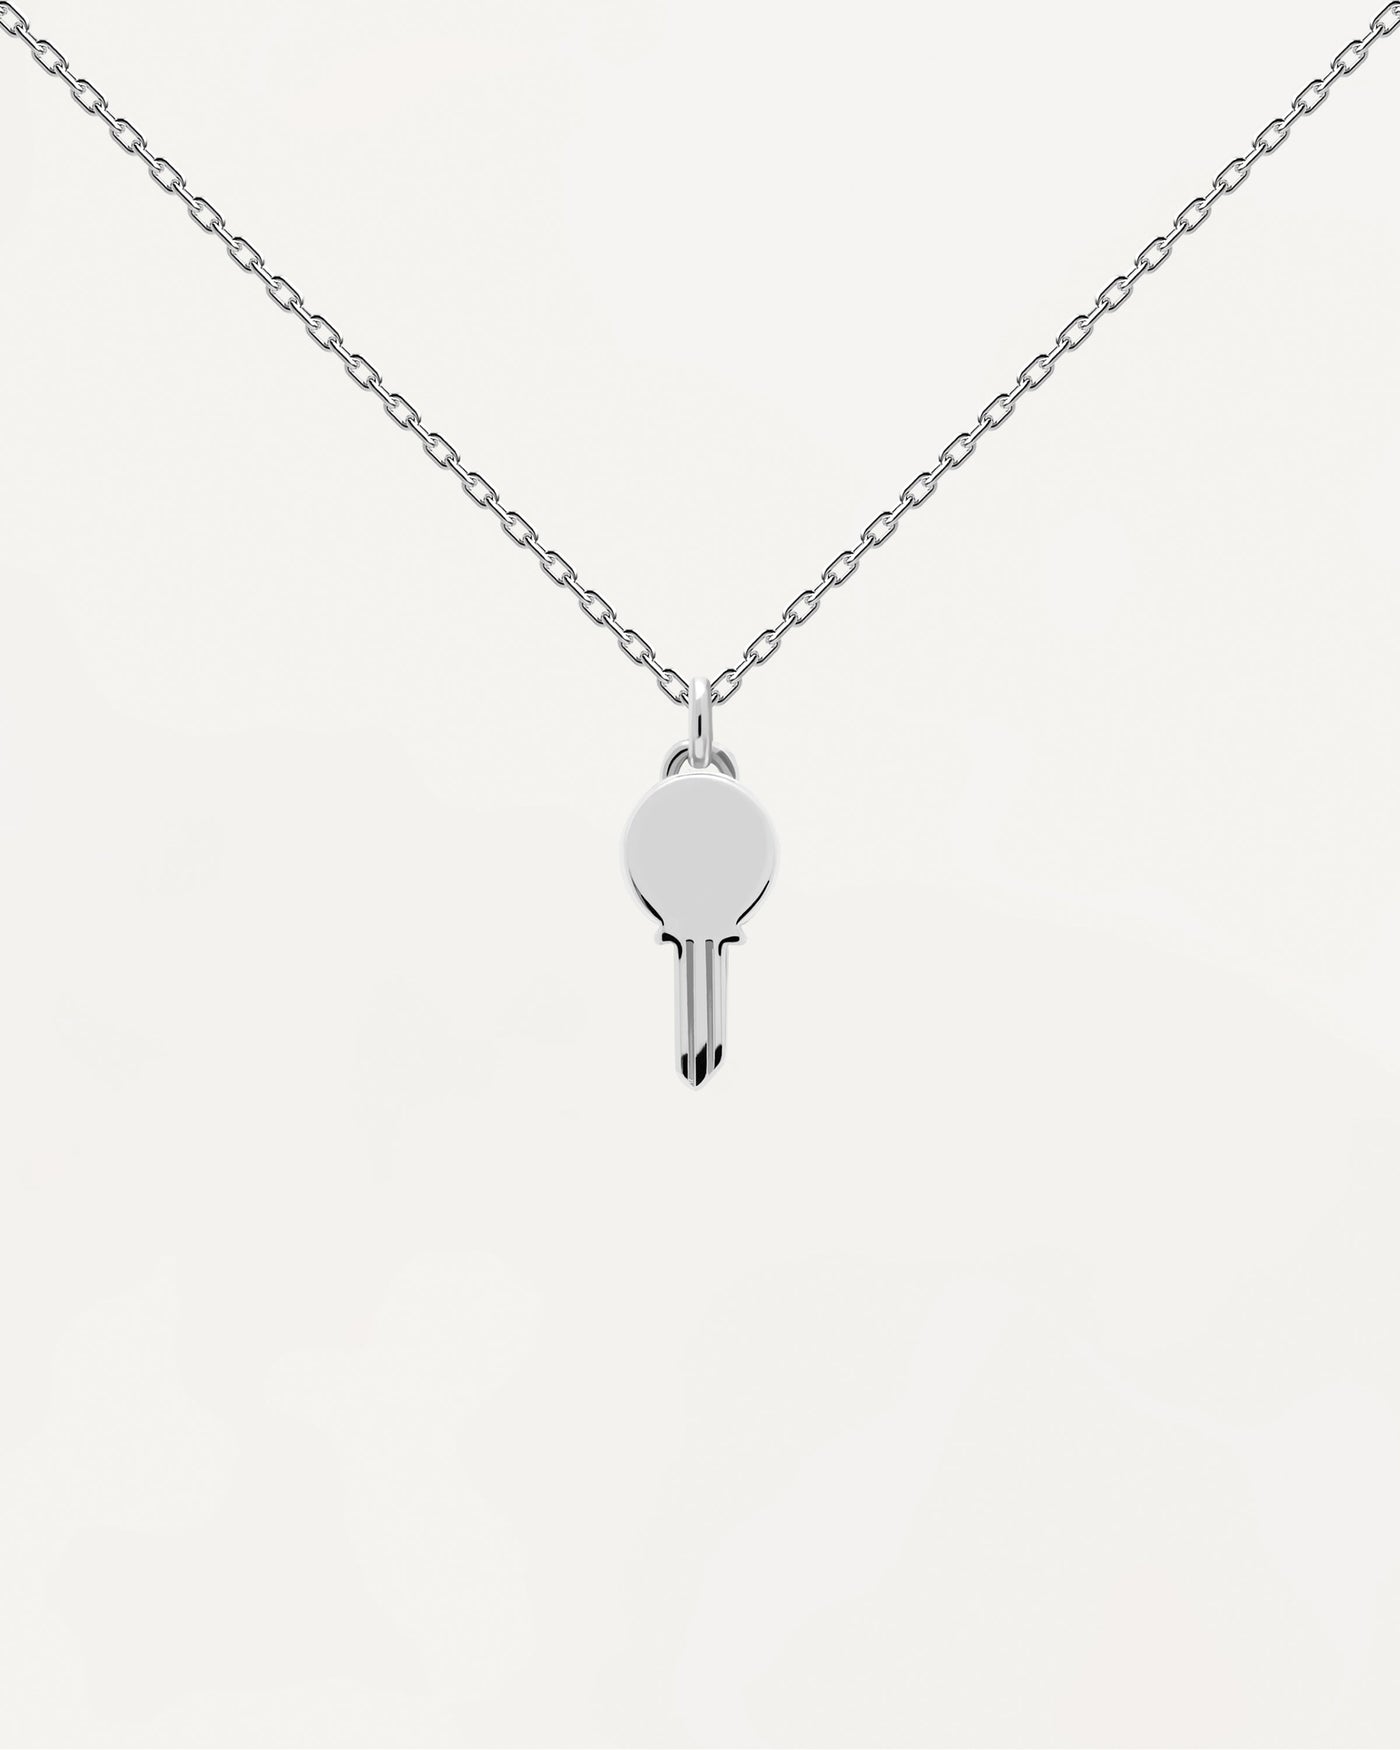 2023 Selection | Eternum Silver Necklace. Sterling silver necklace with personalized key pendant to engrave. Get the latest arrival from PDPAOLA. Place your order safely and get this Best Seller. Free Shipping.